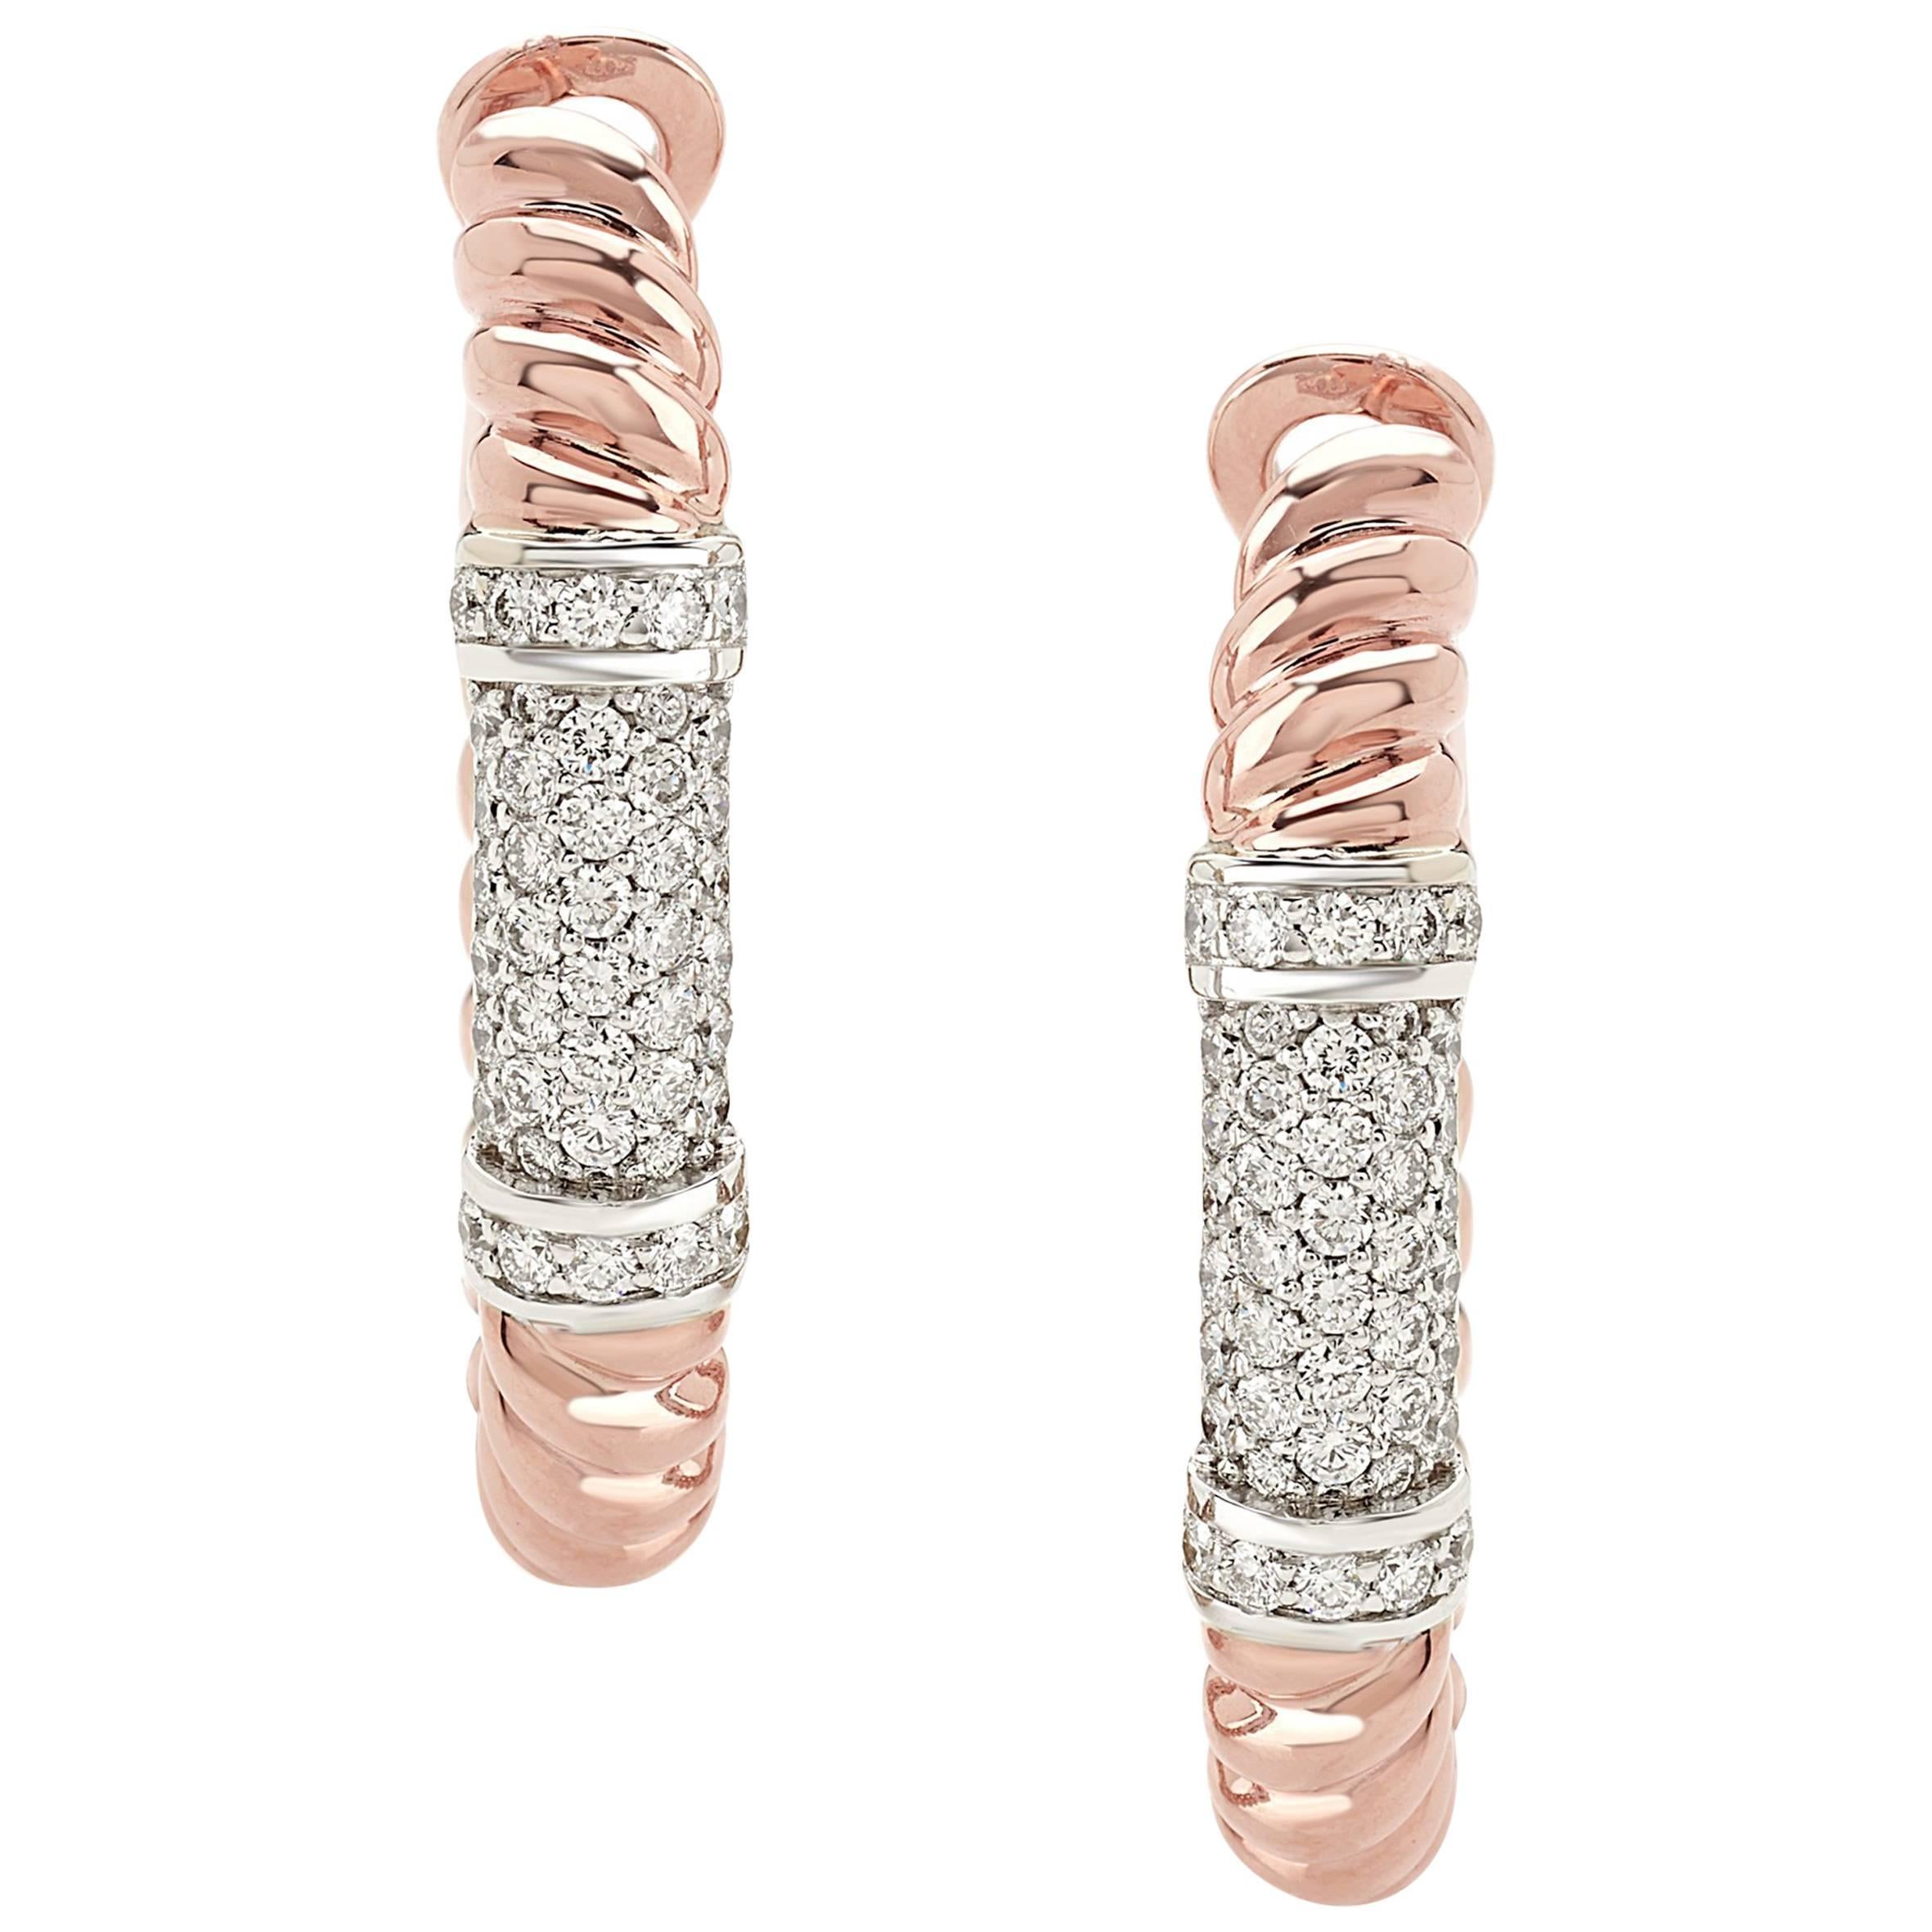 Pair of Earrings from the Collection "Rope" 18 Karat Rose Gold and Diamonds For Sale